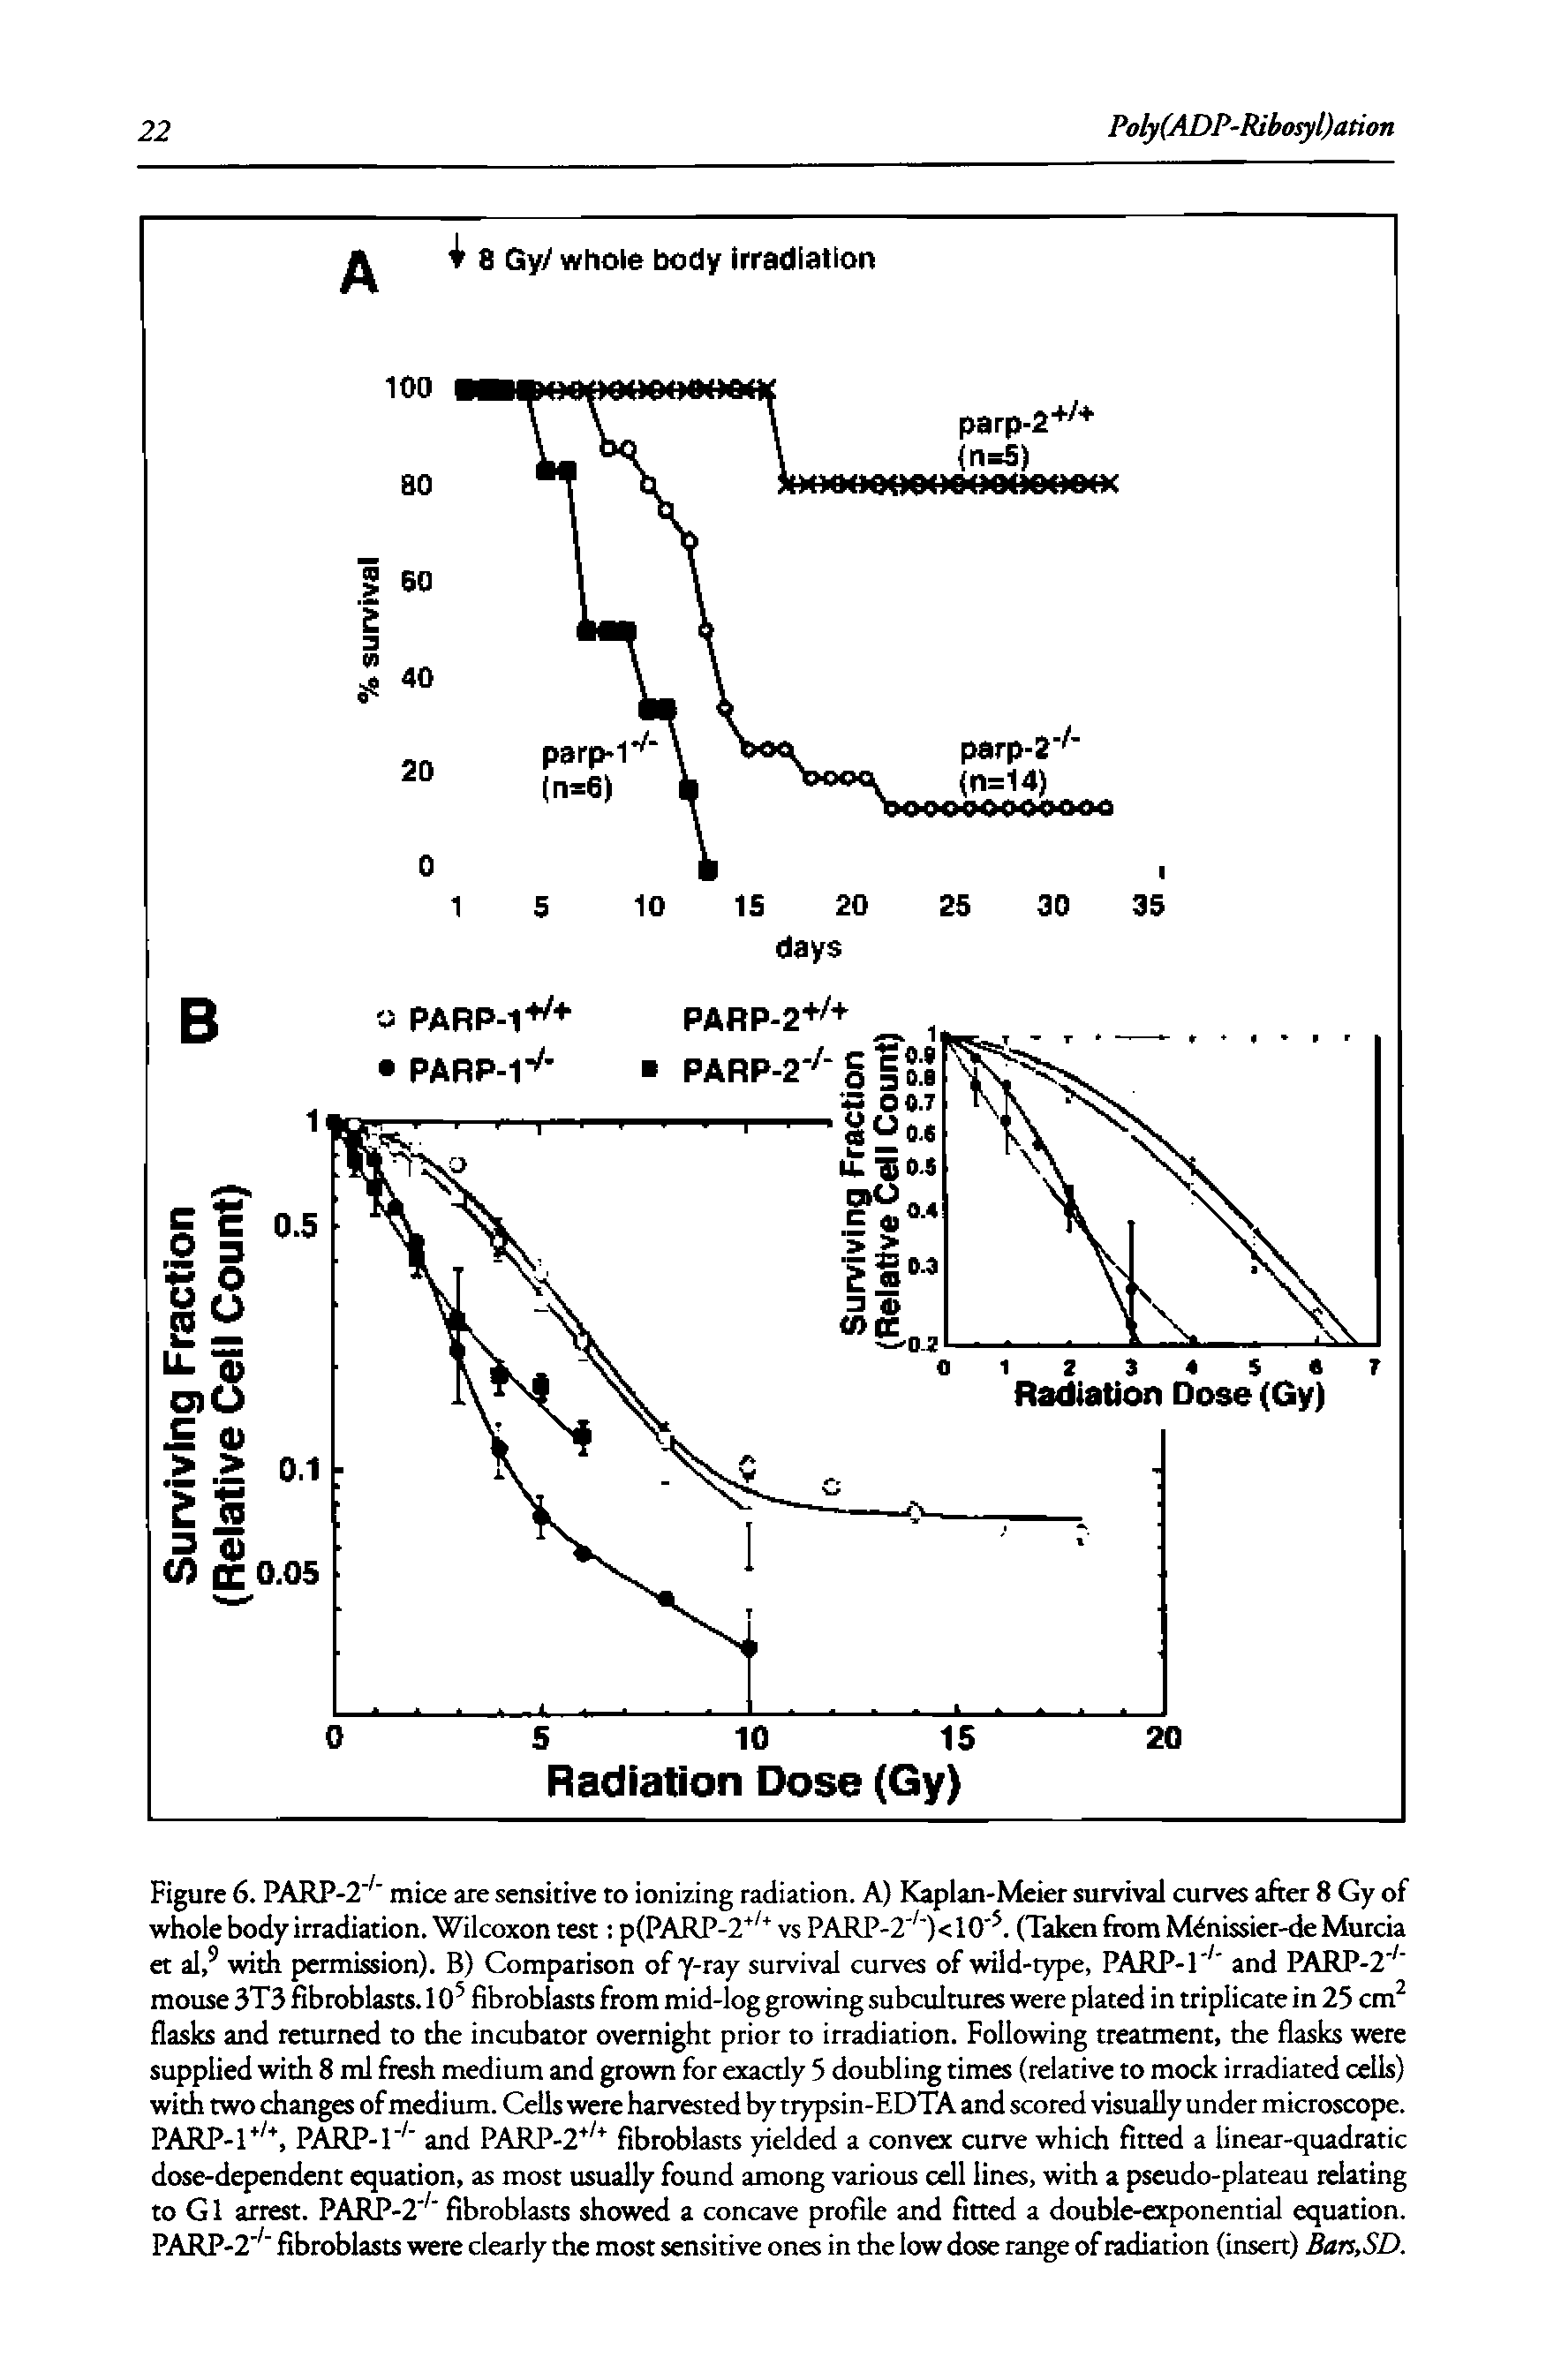 Figure 6. PARP-2" mice are sensitive to ionizing radiation. A) Kaplan-Meier survival curves after 8 Gy of whole body irradiation. Wilcoxon test p(PARP-2 vs PARP-2 ) < 10. (Taken from Minissier-de Murcia et al, with permission). B) Comparison ofy-ray survival curves of wild-type, PARP-T and PARP-2 mouse 3T3 fibroblasts. 10 fibroblasts from mid-log growing subcultures were plated in triplicate in 25 cm flasks and returned to the incubator overnight prior to irradiation. Following treatment, the flasks were supplied with 8 ml fresh medium and grown for exacdy 5 doubling times (relative to mock irradiated cells) with two changes of medium. Cells were harvested by trypsin-EDTA and scored visually under microscope. PARP-1, PARP-T and PARP-2 fibroblasts yielded a convex curve which fitted a linear-quadratic dose-dependent equation, as most usually found among various cell lines, with a pseudo-plateau relating to Cl arrest. PARP-2 fibroblasts showed a concave profile and fitted a double-exponential equation. PARP-2 fibroblasts were clearly the most sensitive ones in the low dose rai of radiation (insert) Bars,SD.